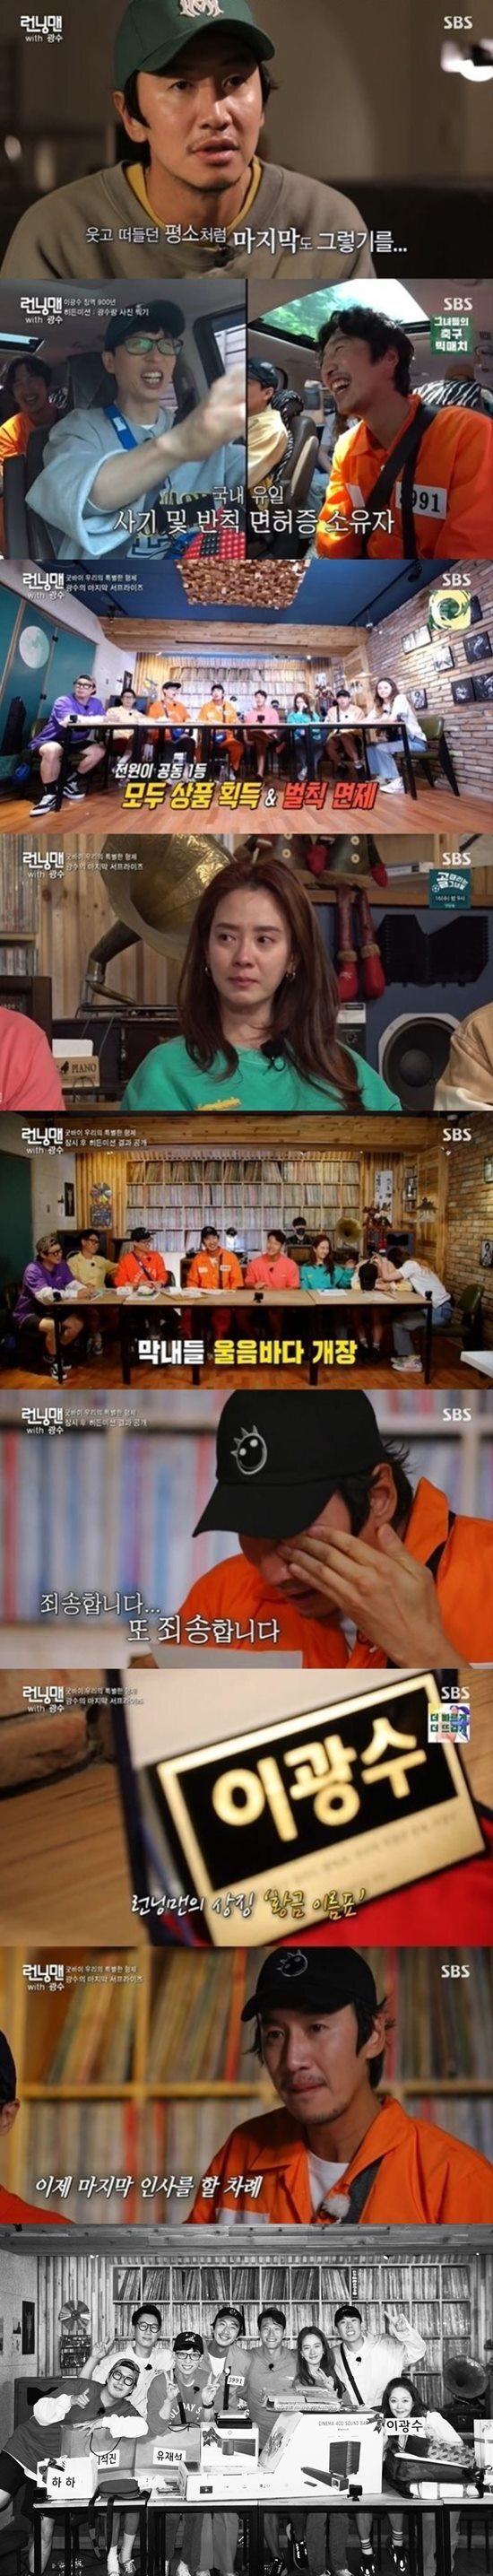 Lee Kwang-soo, who ran together for 3991 days, said goodbye to Tears at Running Man.SBS Running Man, which was broadcast on the 13th, recorded an average of 3.1% of SBSs main target 2049 ratings (hereinafter based on Nielsen Korea metropolitan area, households), maintaining the top spot in the same time zone, and the highest audience rating per minute jumped to 7.4%.The broadcast was decorated with Lee Kwang-soos last race My Special Brother as predicted.Lee Kwang-soo said, I would like to record it as usual. He selected the SBS rooftop garden, which was the first recording place of Running Man, and the LP bar that members would like to shoot.The production team invited a former judge to conduct a trial against Lee Kwang-soo, who had committed numerous betrayals in Running Man.Former judge Jung Jae-min said to Lee Kwang-soo, who committed a total of 3353 crimes, including 58 property losses, 353 assaults, 37 performances, 1812 frauds, and other misdemeanors.I will be sentenced to 1050 years in prison, the ruling said.Members had to help Lee Kwang-soos edification, and they had to take another mission secretly to perform Lee Kwang-soo and take as many pictures as possible.Lee Kwang-soos last recording, but all members showed Running Man down breakup method with Lee Kwang-soo mall from the beginning.Yoo Jae-seok said, Think again. Suddenly, Im sorry and get off.Still, viewers will understand it, he said, and on the outdoor pork belly menu, I just go in today and lets get off next time. But the last was the Sea of Tears. Lee Kwang-soo didnt read the letters the members had prepared.We seemed to be forever. Lets go together for the rest of our lives. Haha said, I was troubled.I will pray that I will make fun of anyone, cheat with someone, talk with someone all night, and achieve a dream that will shine and achieve wonderfully anywhere. I dont know who to stop talking to and who to ask for a ride, Yoo said. Thank you. I wasnt bored because of you.Lee Kwang-soo said, I am so grateful and sorry for letting me feel now and making me feel another family. I did not do well for 11 years, but I did my best every week.Running Man I would like to ask for your love and interest. Meanwhile, there was a hidden mission in the race on the day.Members were Lee Kwang-soo and the most photographed, first and gift acquisition, and Lee Kwang-soos hidden mission was Make all members the first place.In a warm happy ending, Lee Kwang-soo delivered a gift to the members, and the production team presented Lee Kwang-soo with a golden name tag, a photo album with the last recording, and a speaker that he wanted to have.Lee Kwang-soo and members had the last photo time, and this scene was the highest audience rating of 7.4% per minute, winning the best one minute.Photo = SBS Broadcasting Screen